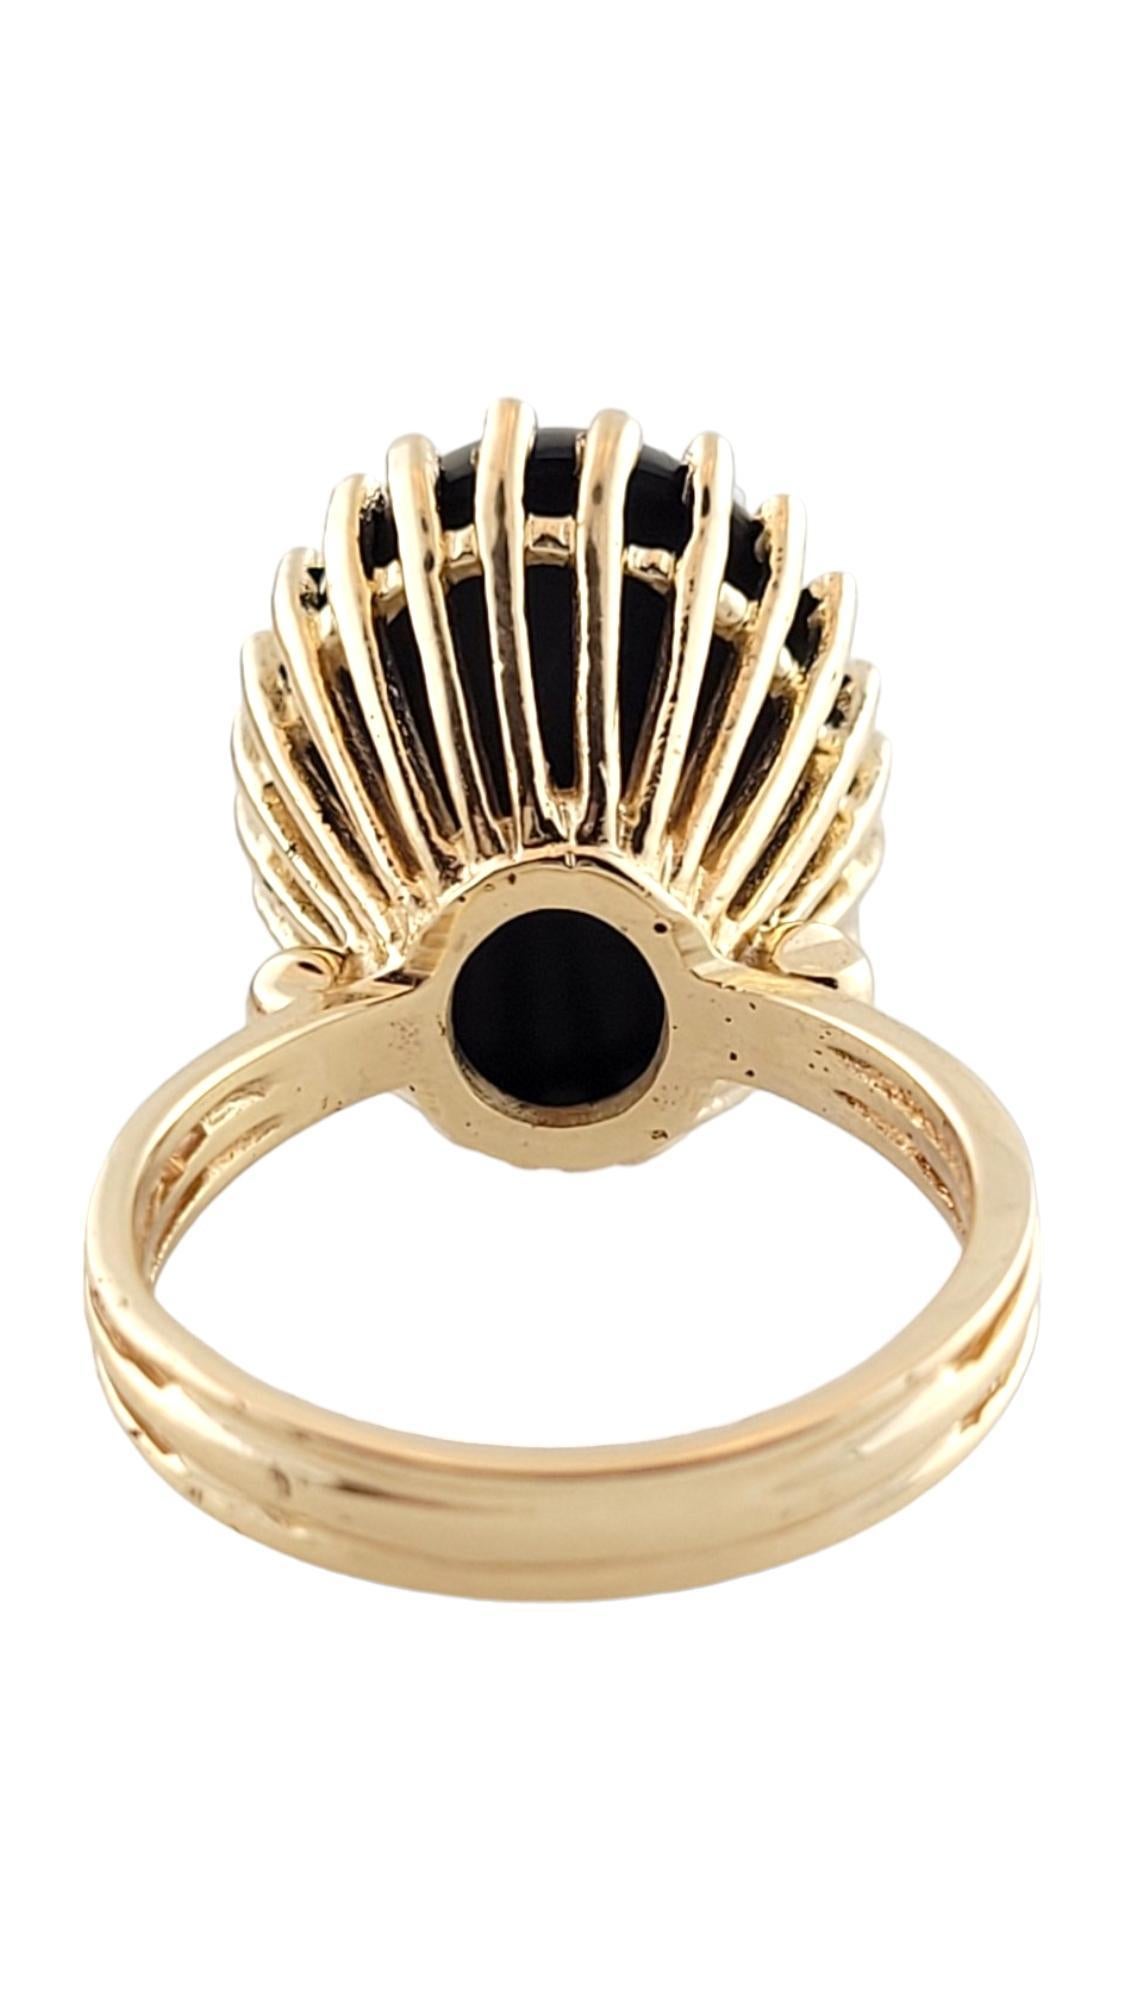 14K Yellow Gold Onyx Ring Size 6.25 #16163 In Good Condition For Sale In Washington Depot, CT